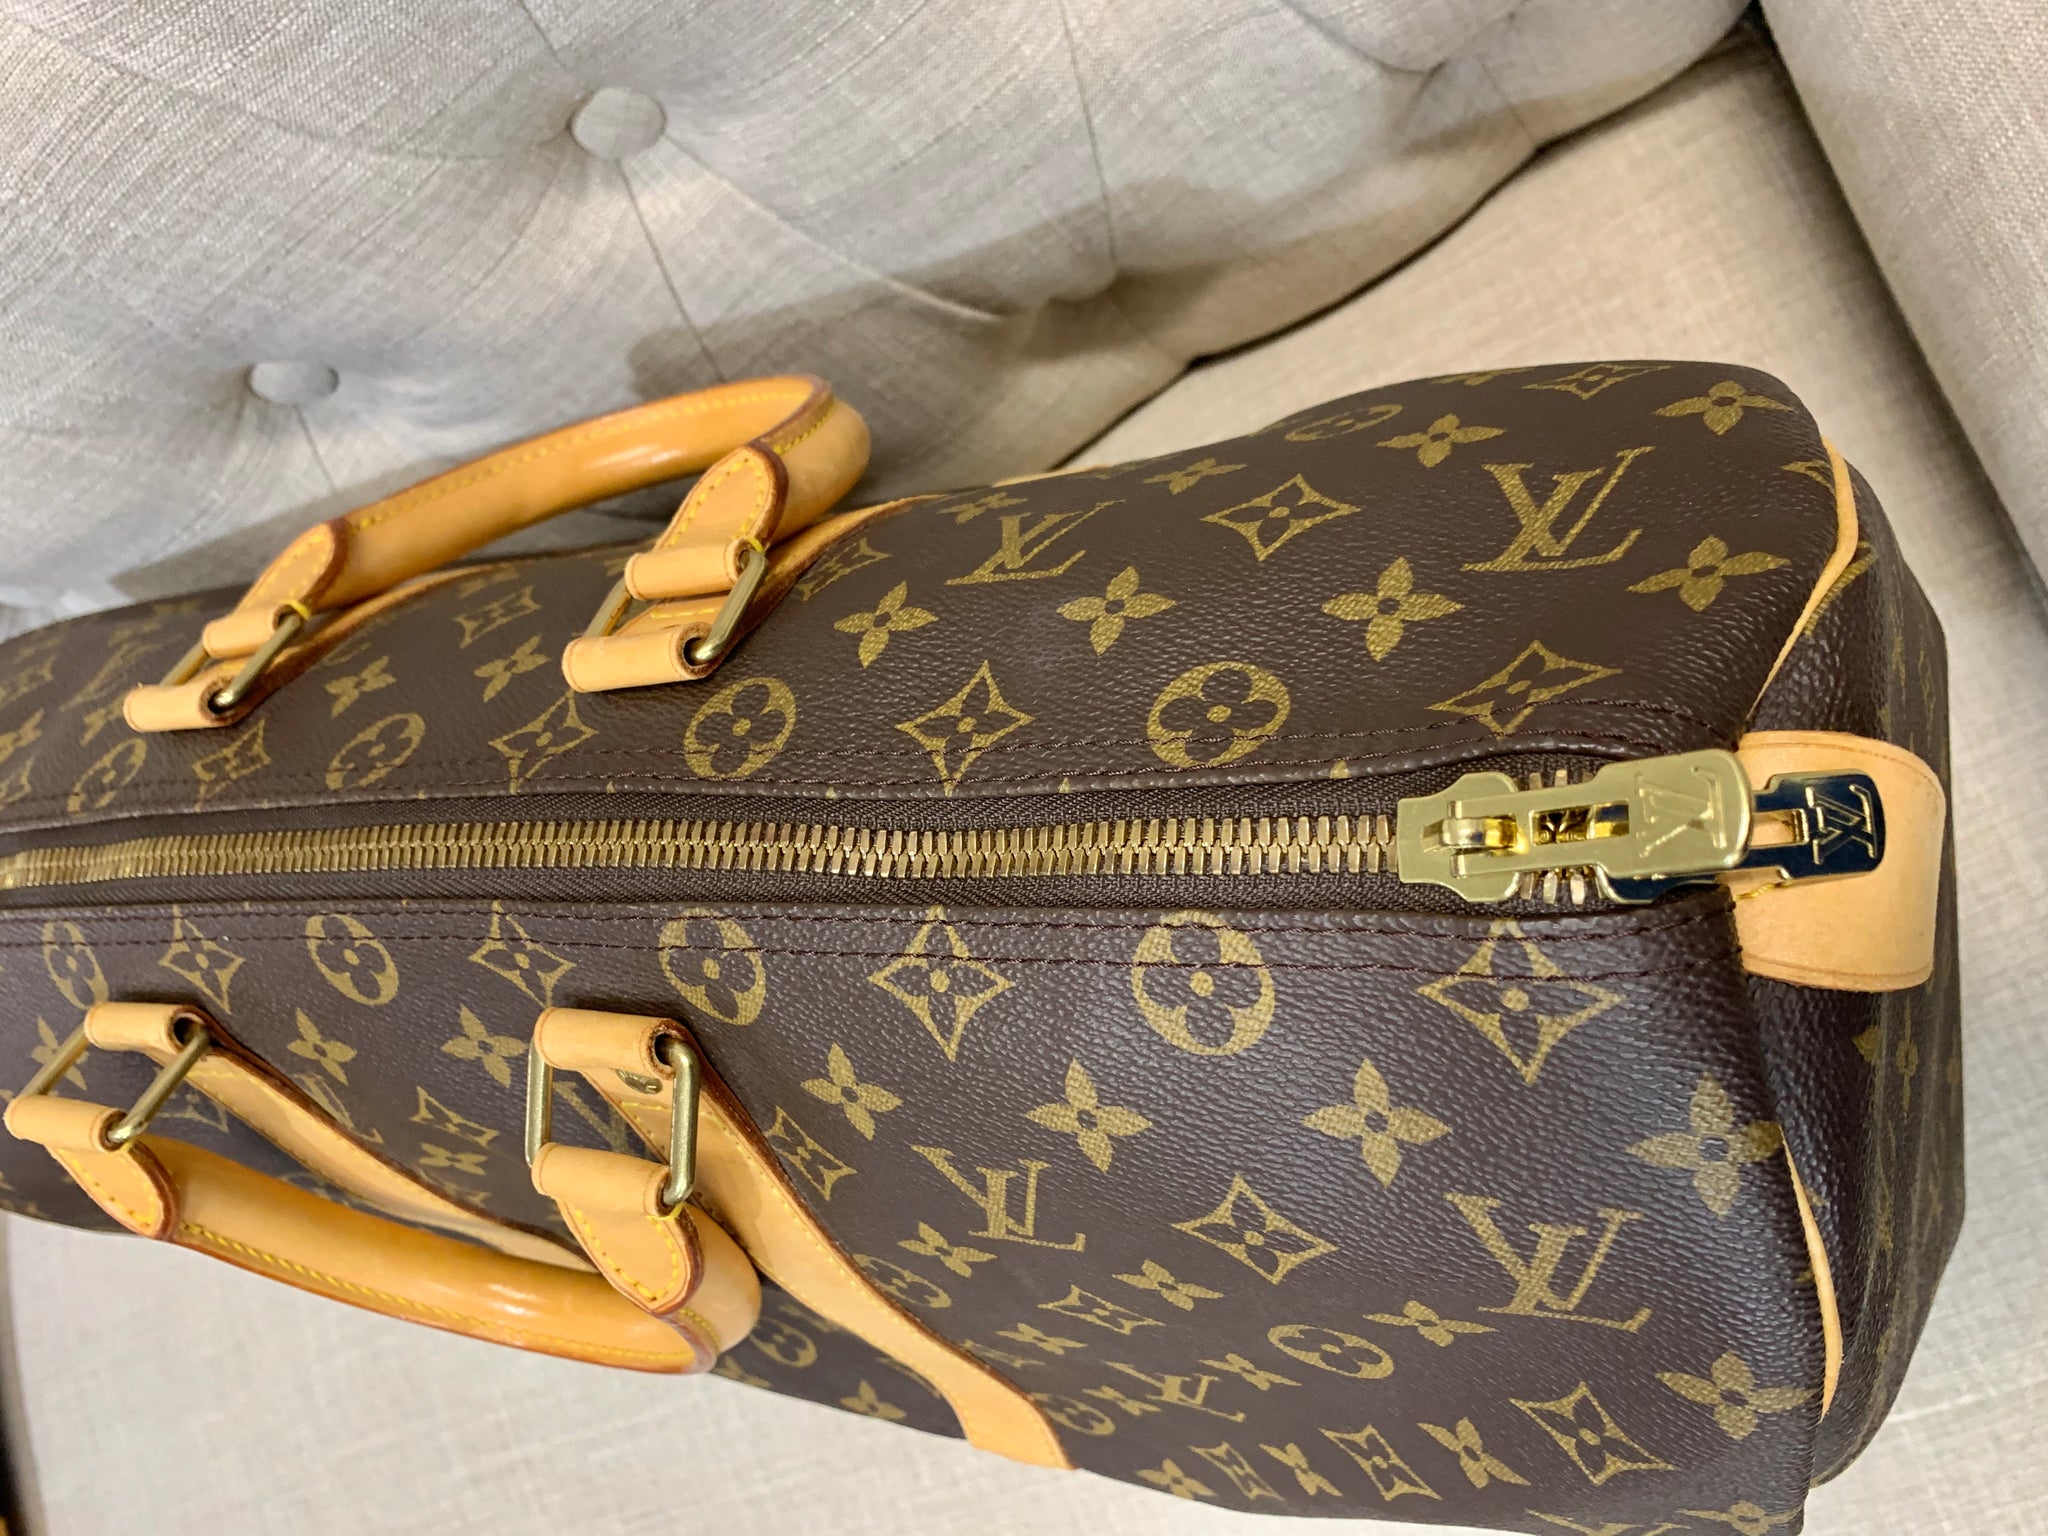 Keepall 45 Duffle Bag (Authentic Pre-Owned) – The Lady Bag